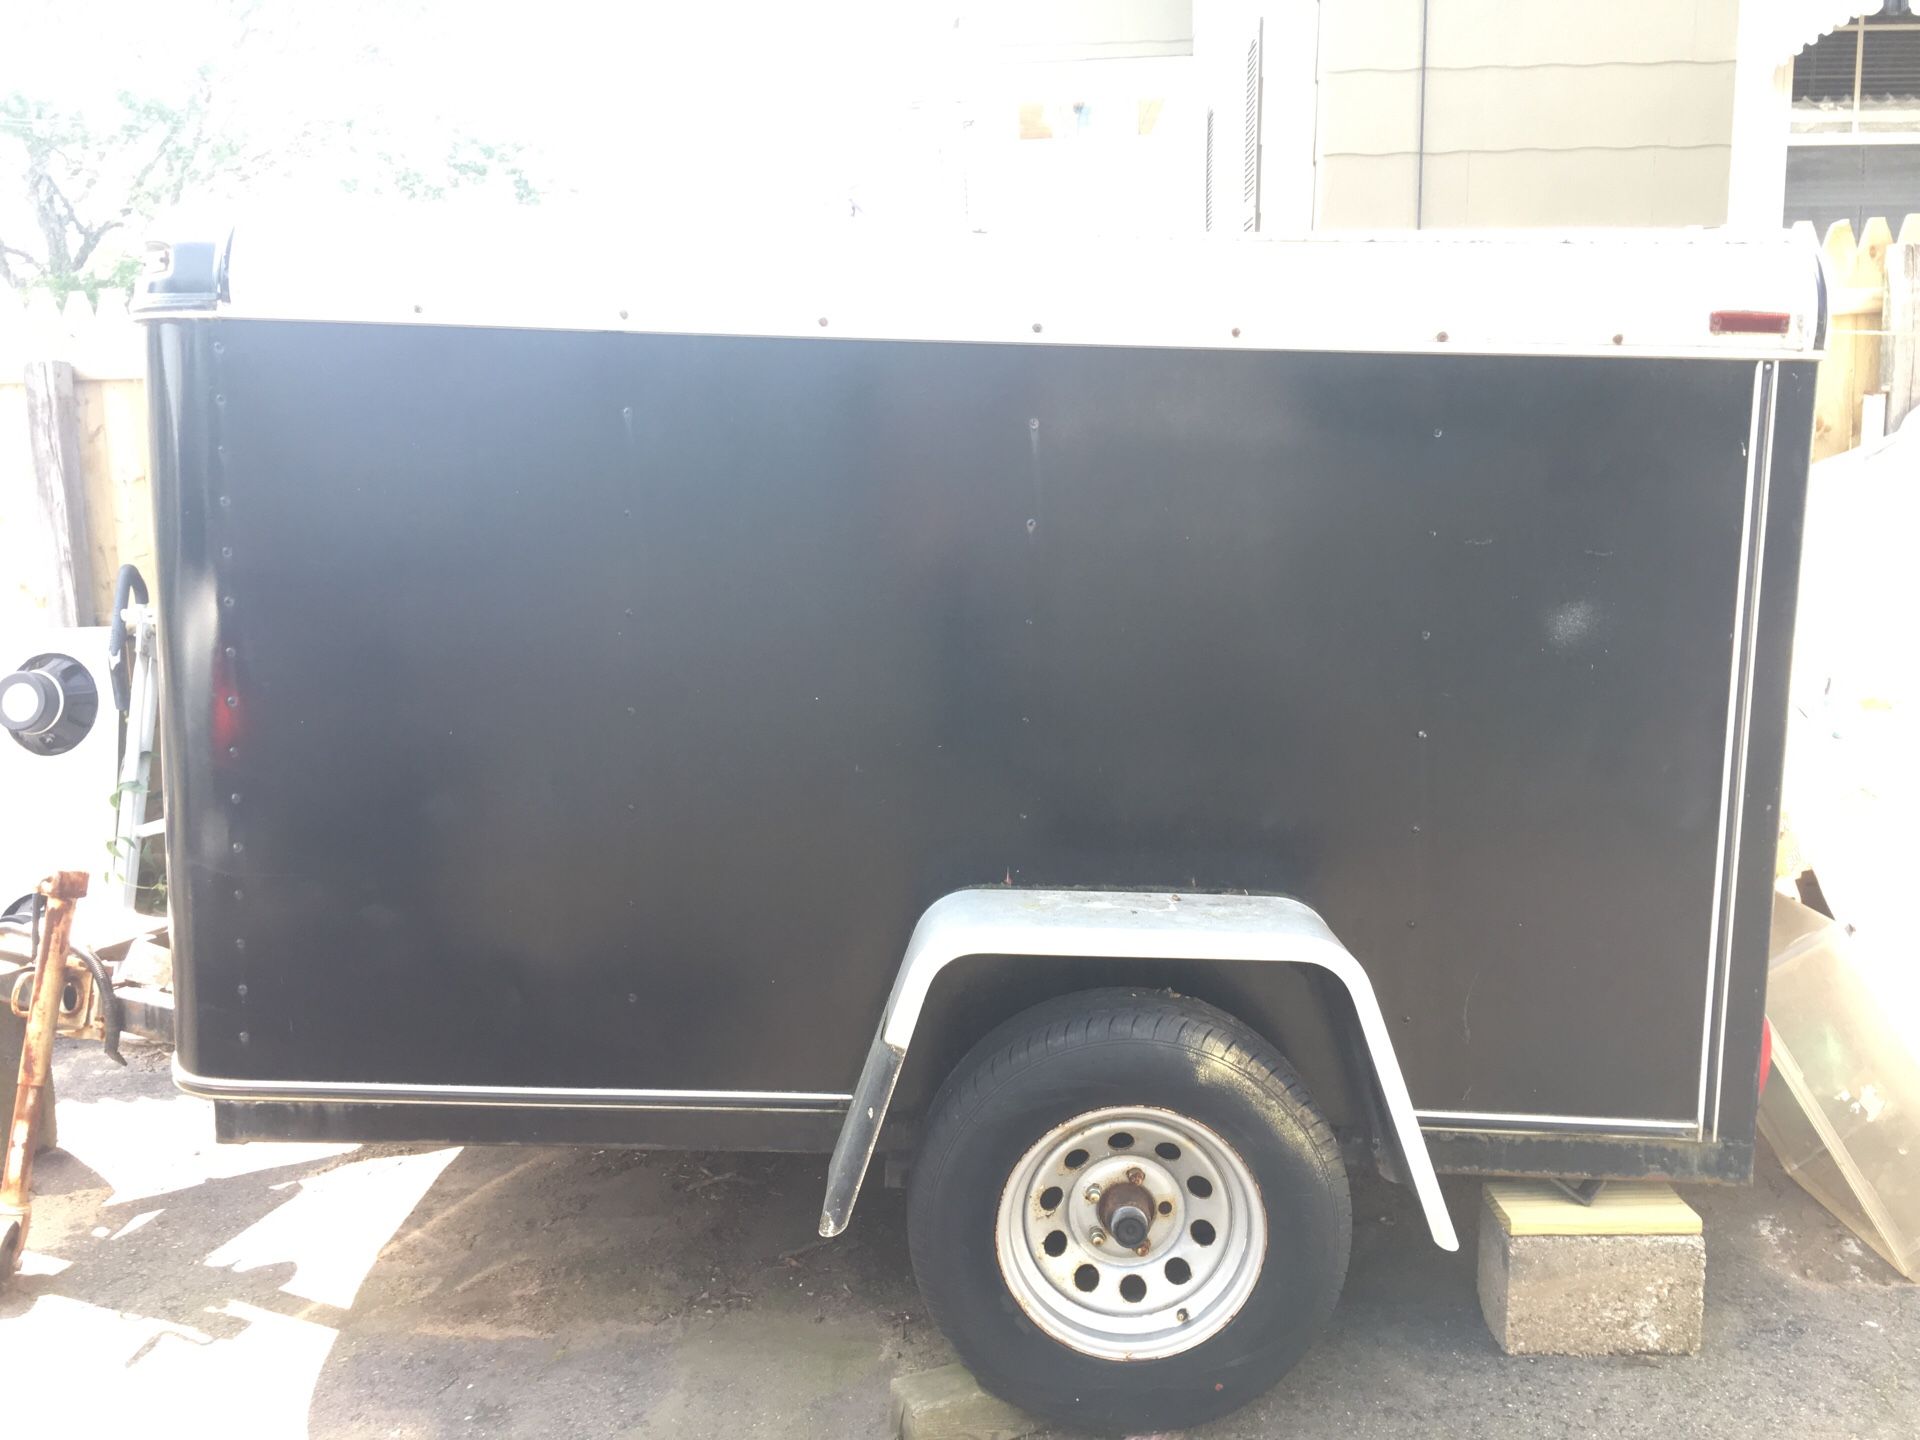 1994 Doolittle enclosed trailer. Approximately 8x4x5 & 2000lbs